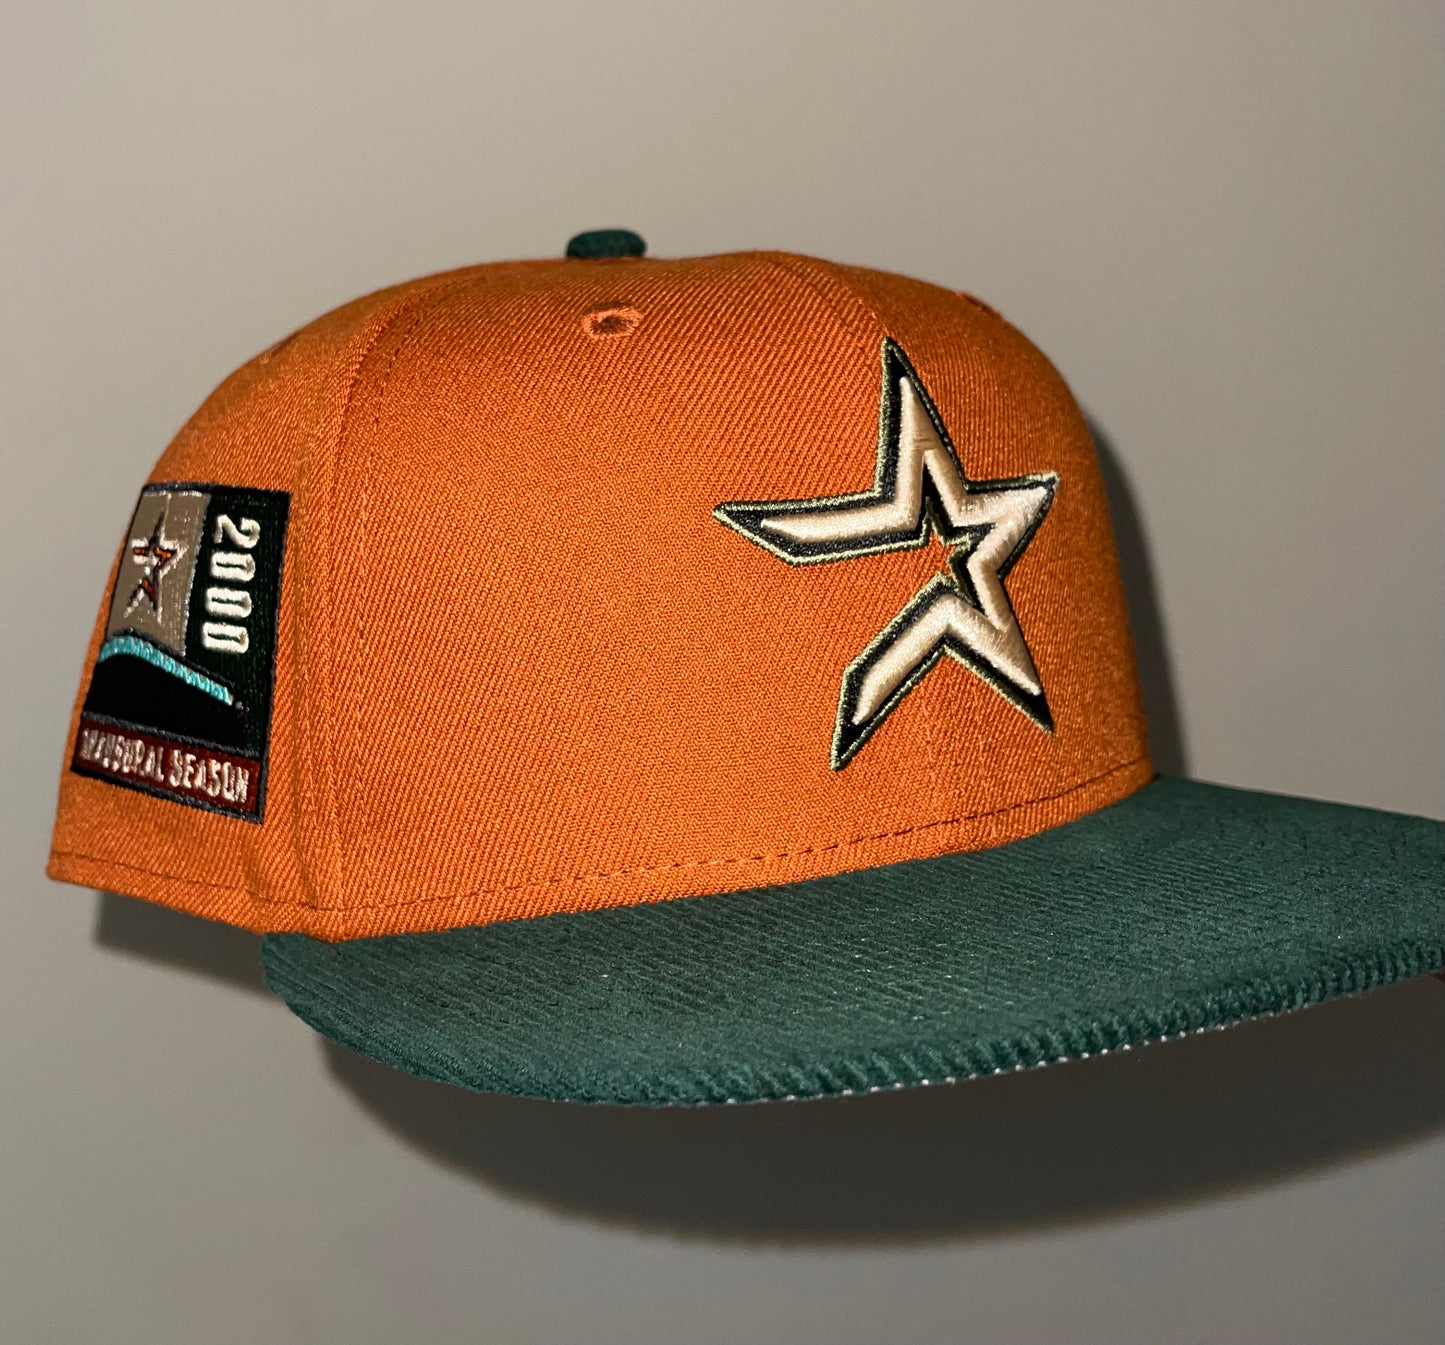 Houston Astros 2000 Inaugural Season Side Patch Fitted Hat New Era 5950 (Rust Orange/Green/Gray)